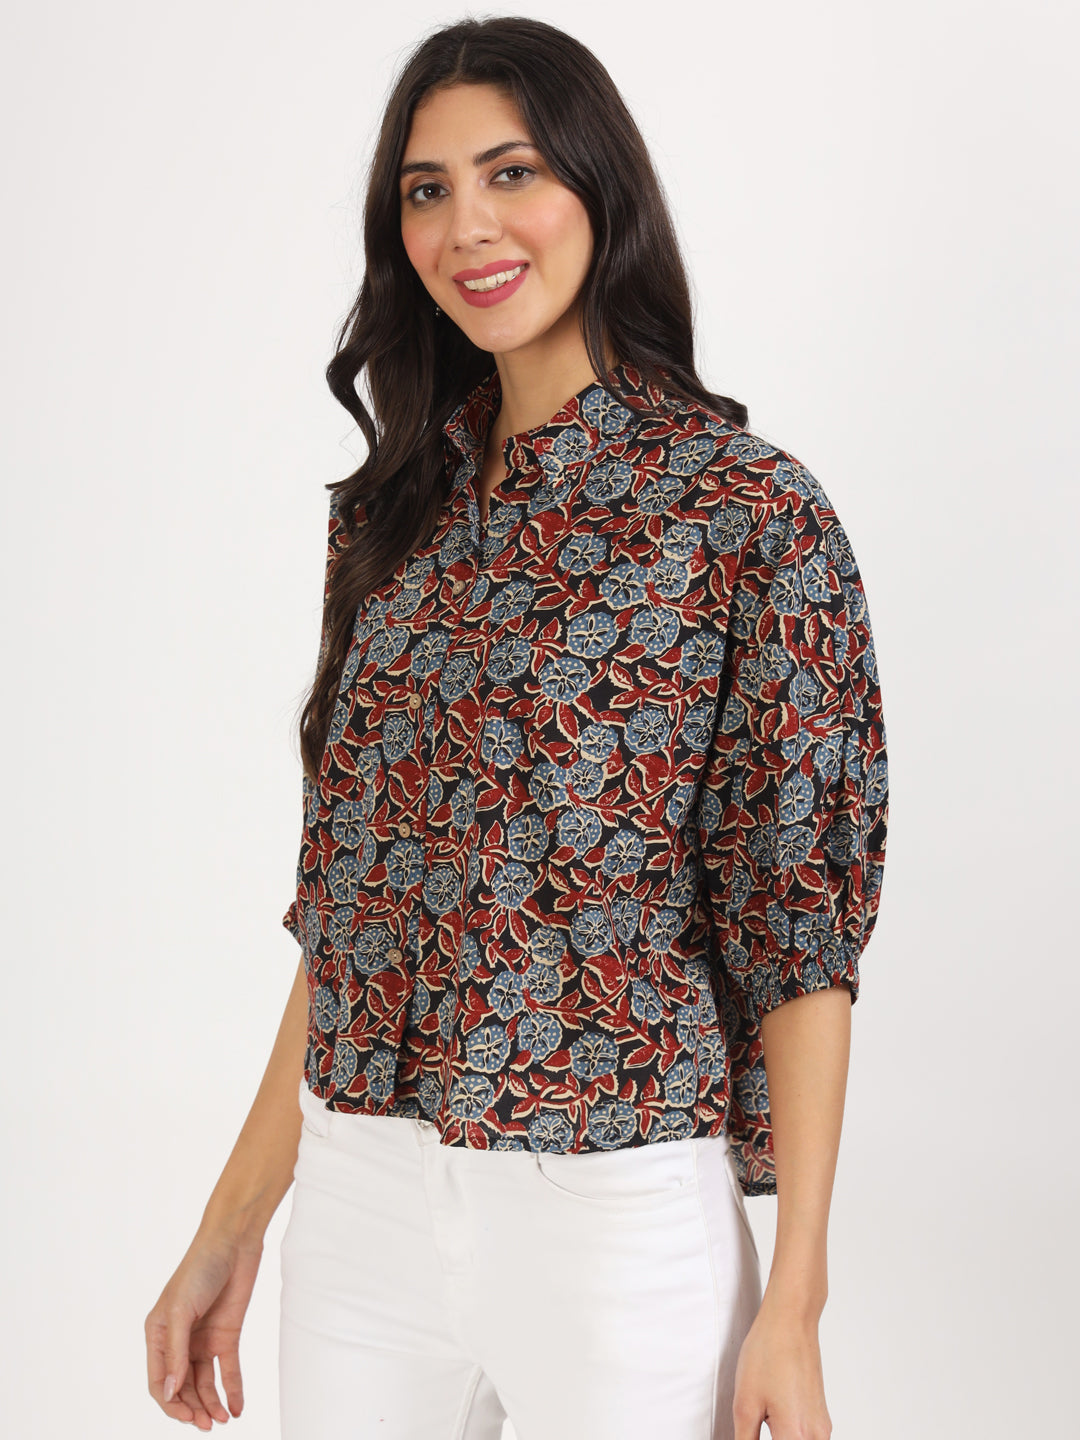 Black Floral Printed Cotton Tops